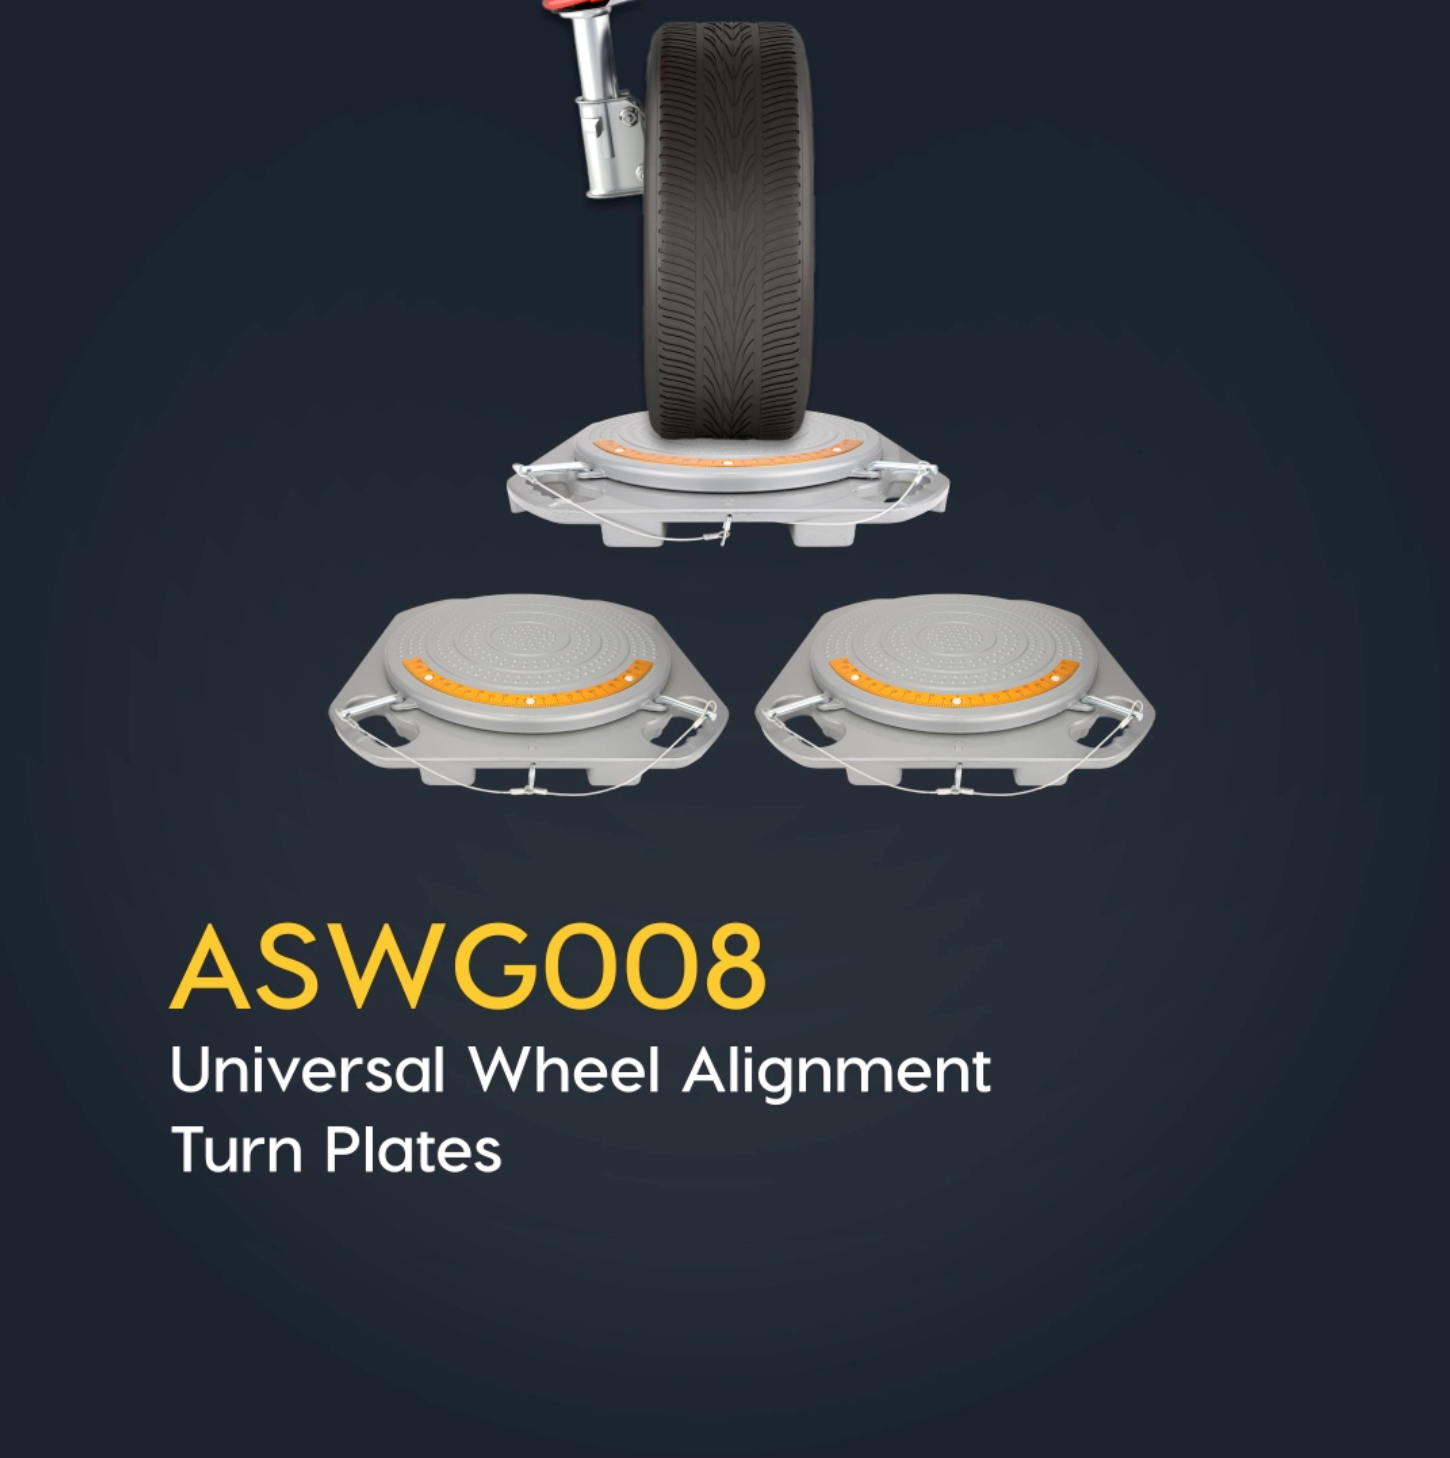 Wheel Alignment Turn Tables with Brass Finish Dial, 4 Ton Capacity, and Bonus Accessories (Pair)